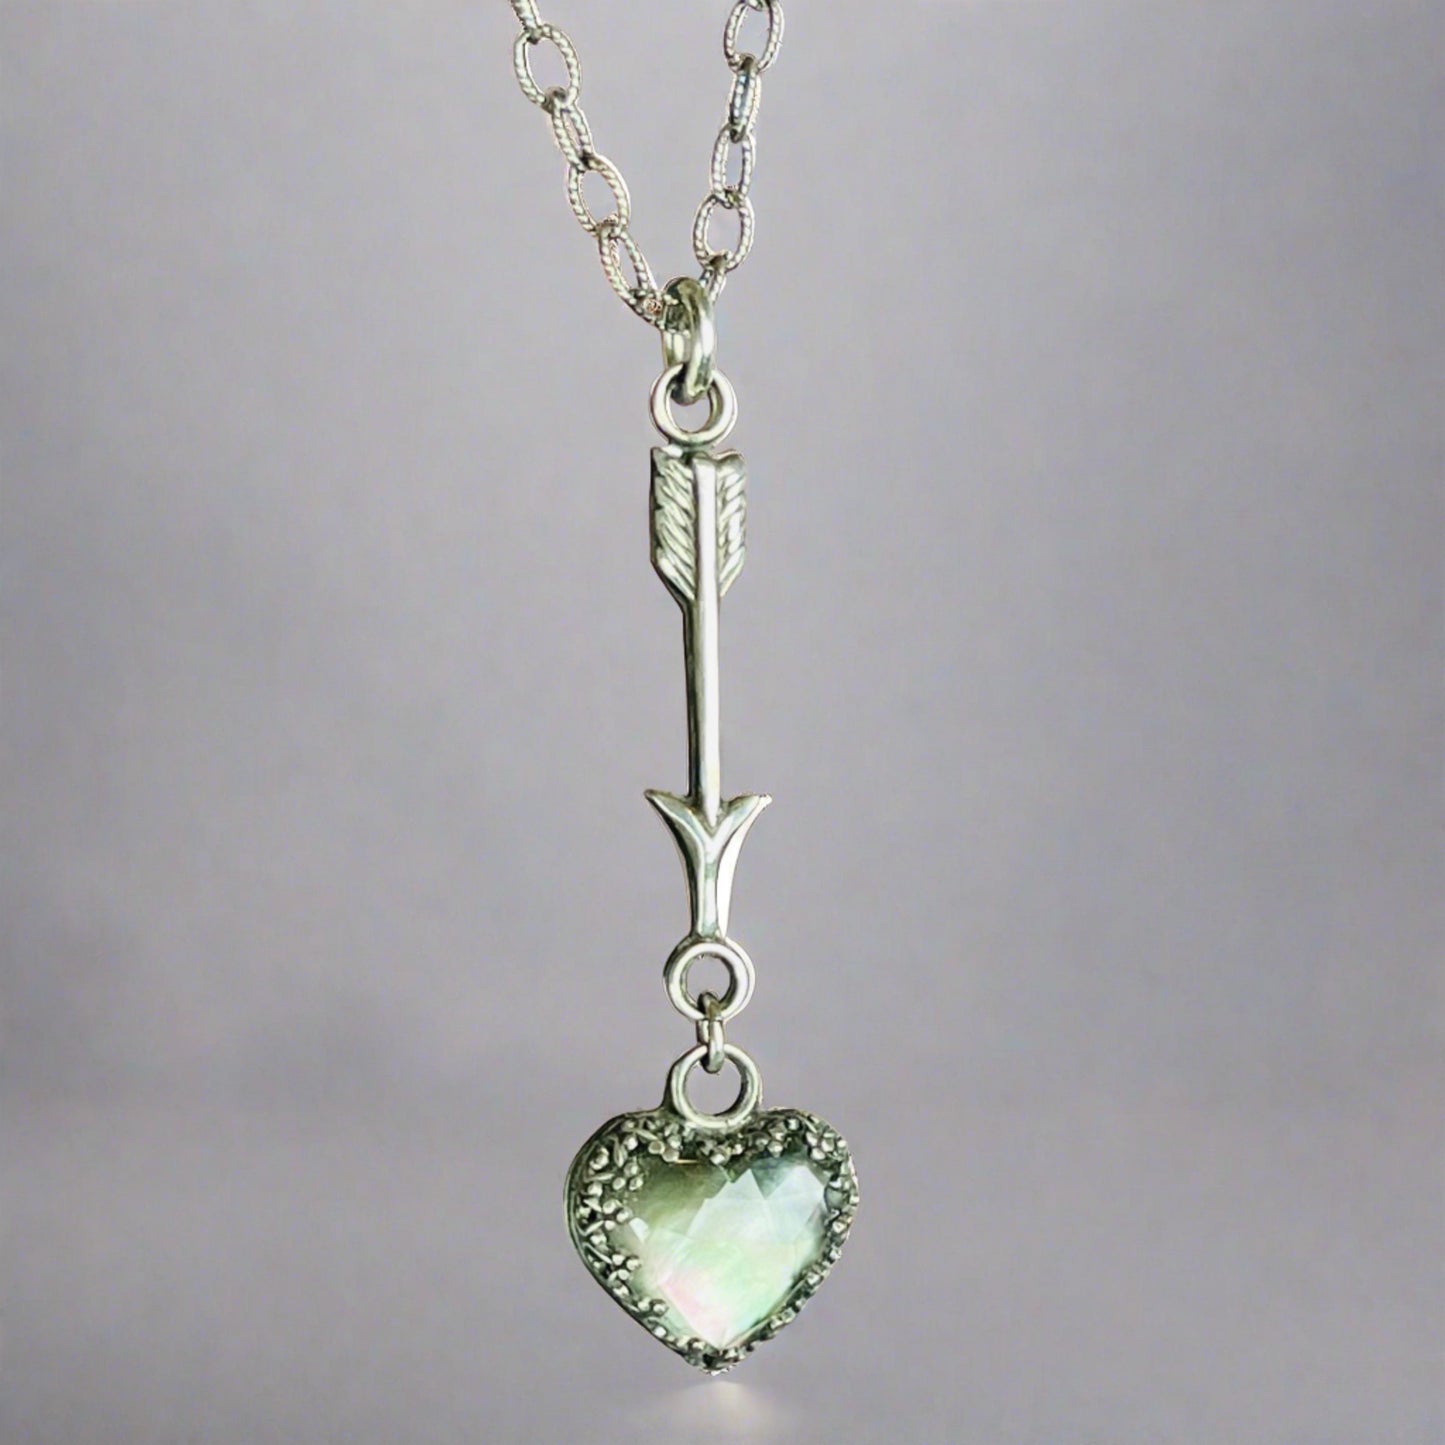 Gothic Victorian Handmade Mini Arrow MOP Crystal Heart Sterling Necklace - Loved To Death